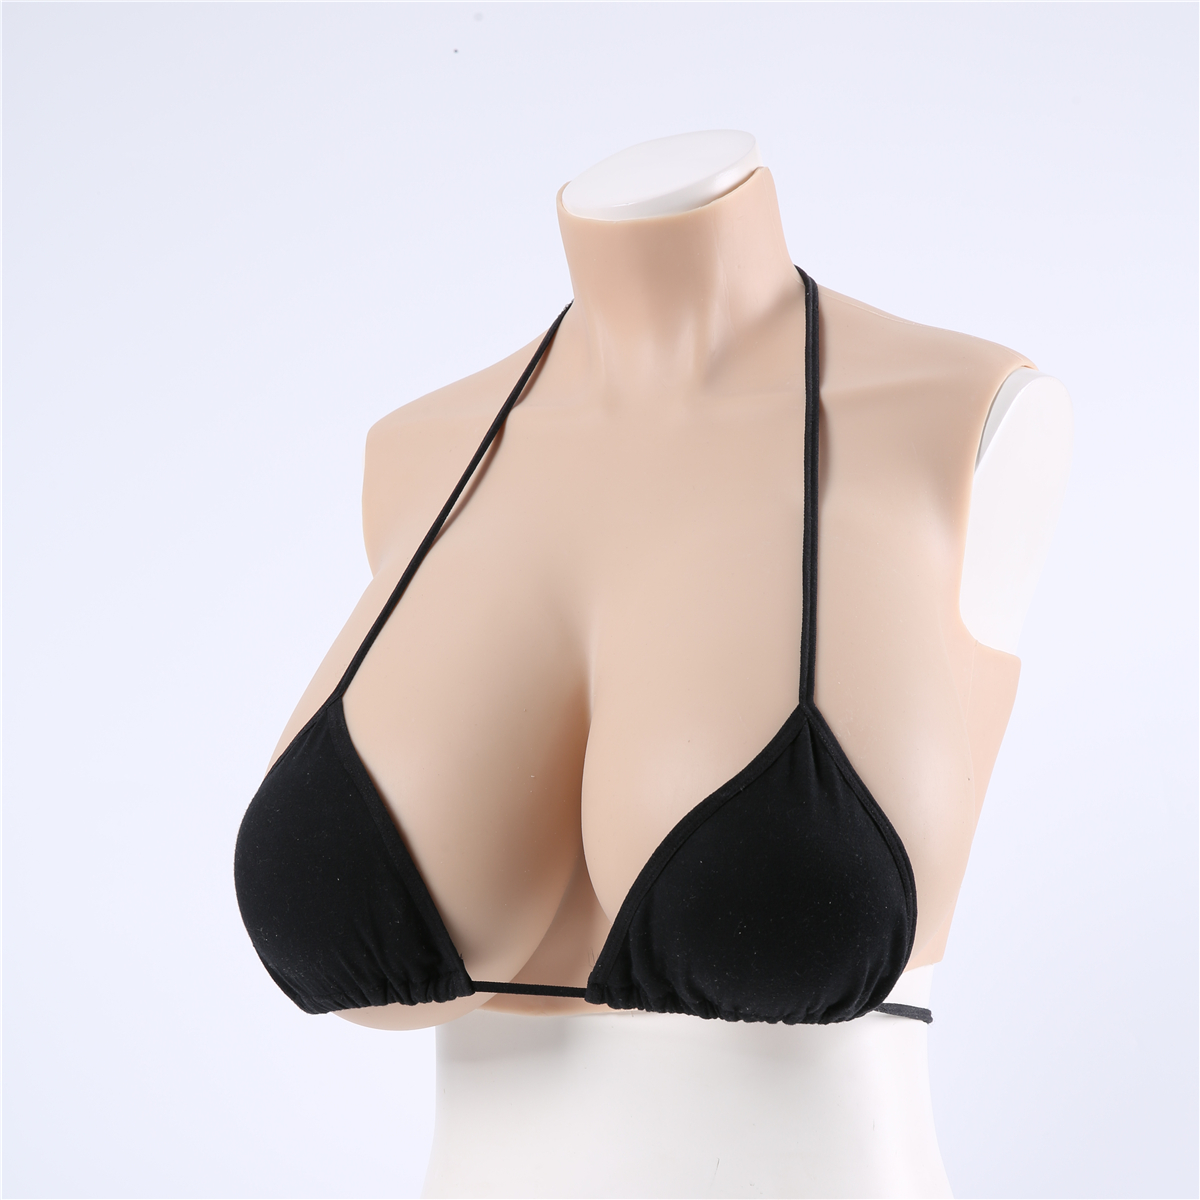 huge breasts forms I-cup realistic comfortable